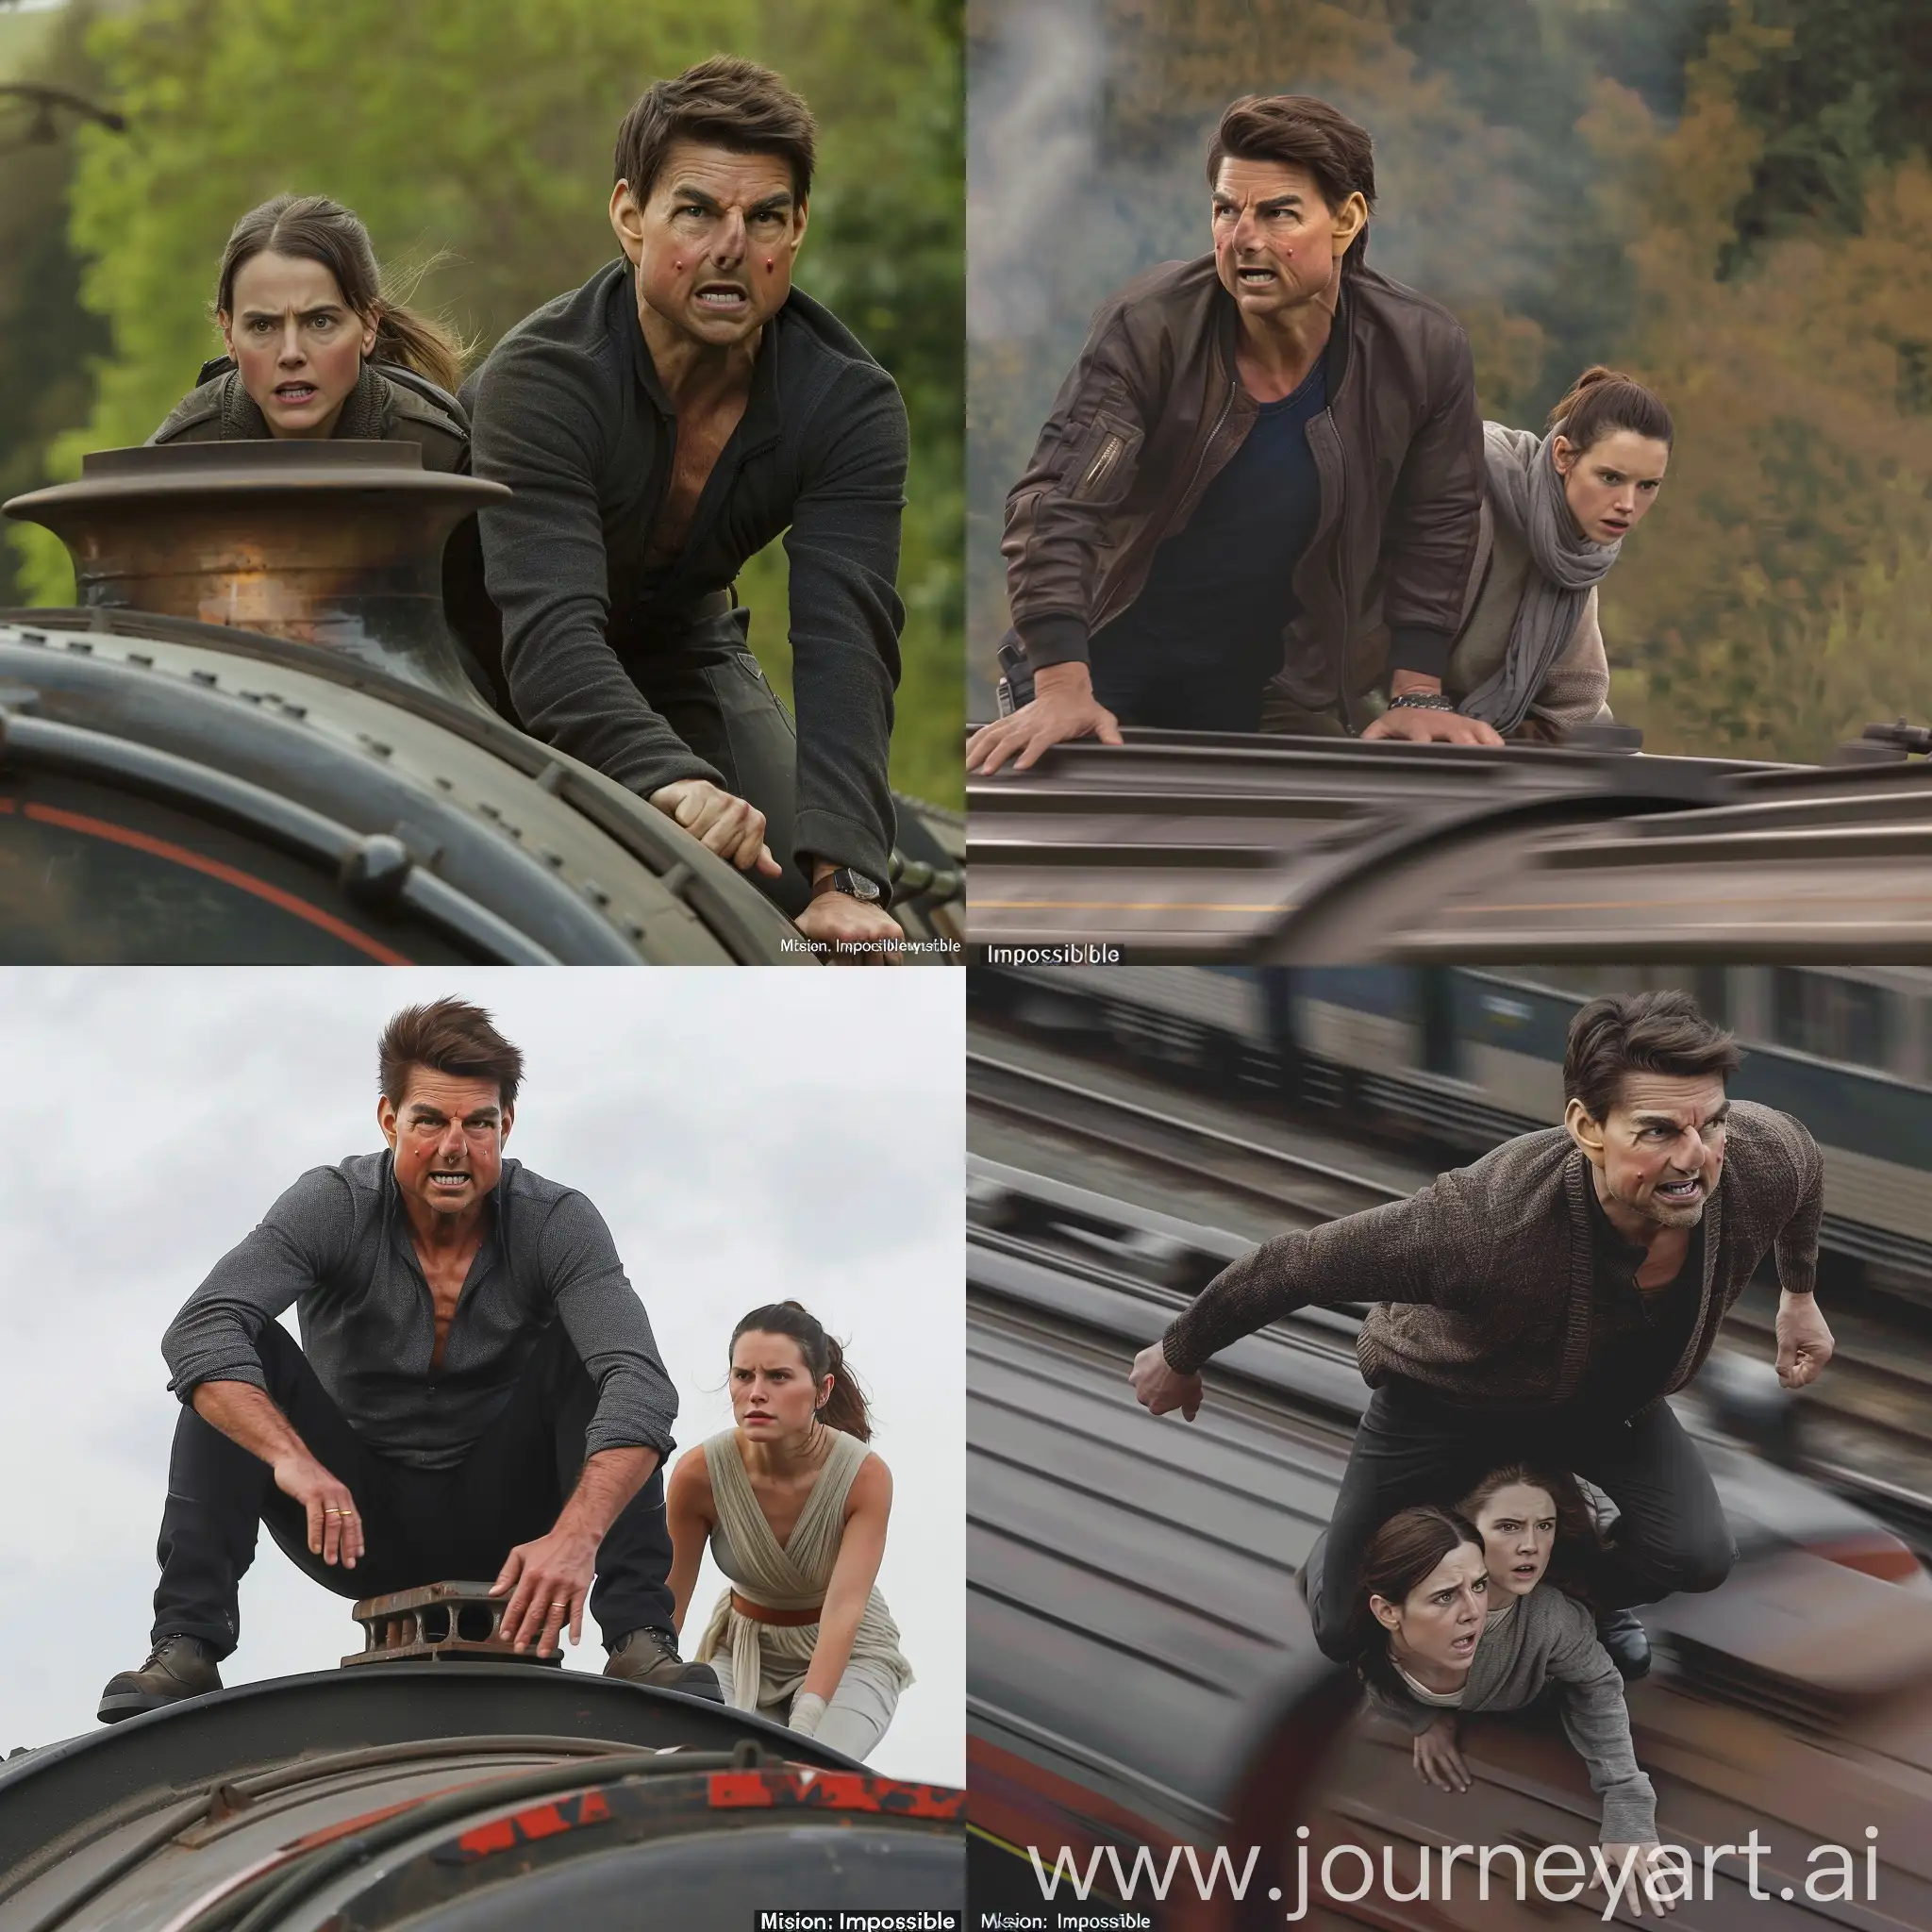 Tom-Cruise-and-Daisy-Ridley-on-Speeding-Train-HighStakes-Action-Scene